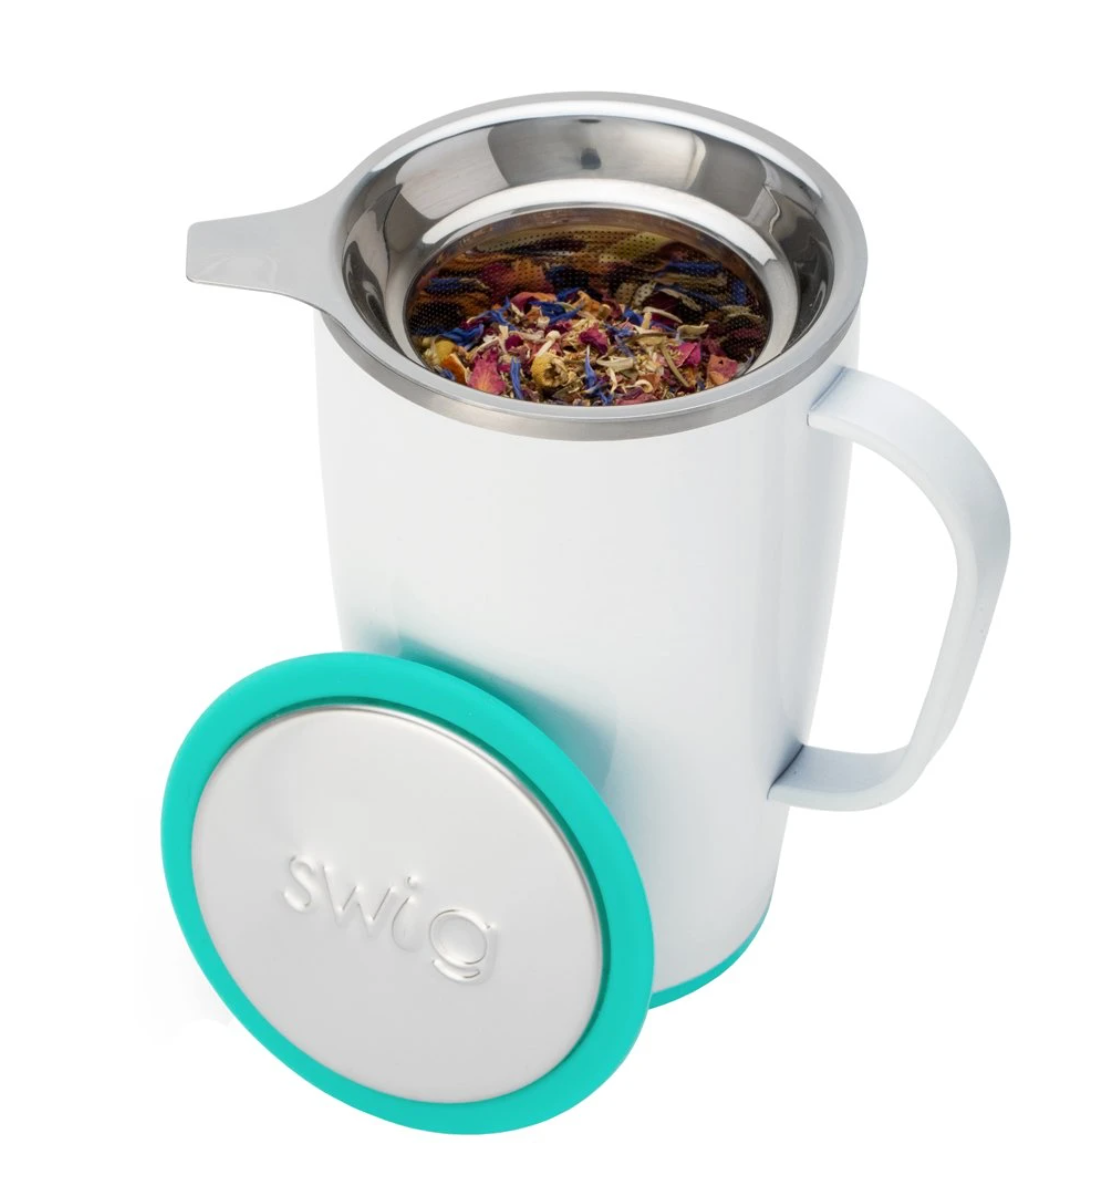 Swig Stainless Steel Tea Infuser with Silicone Cover